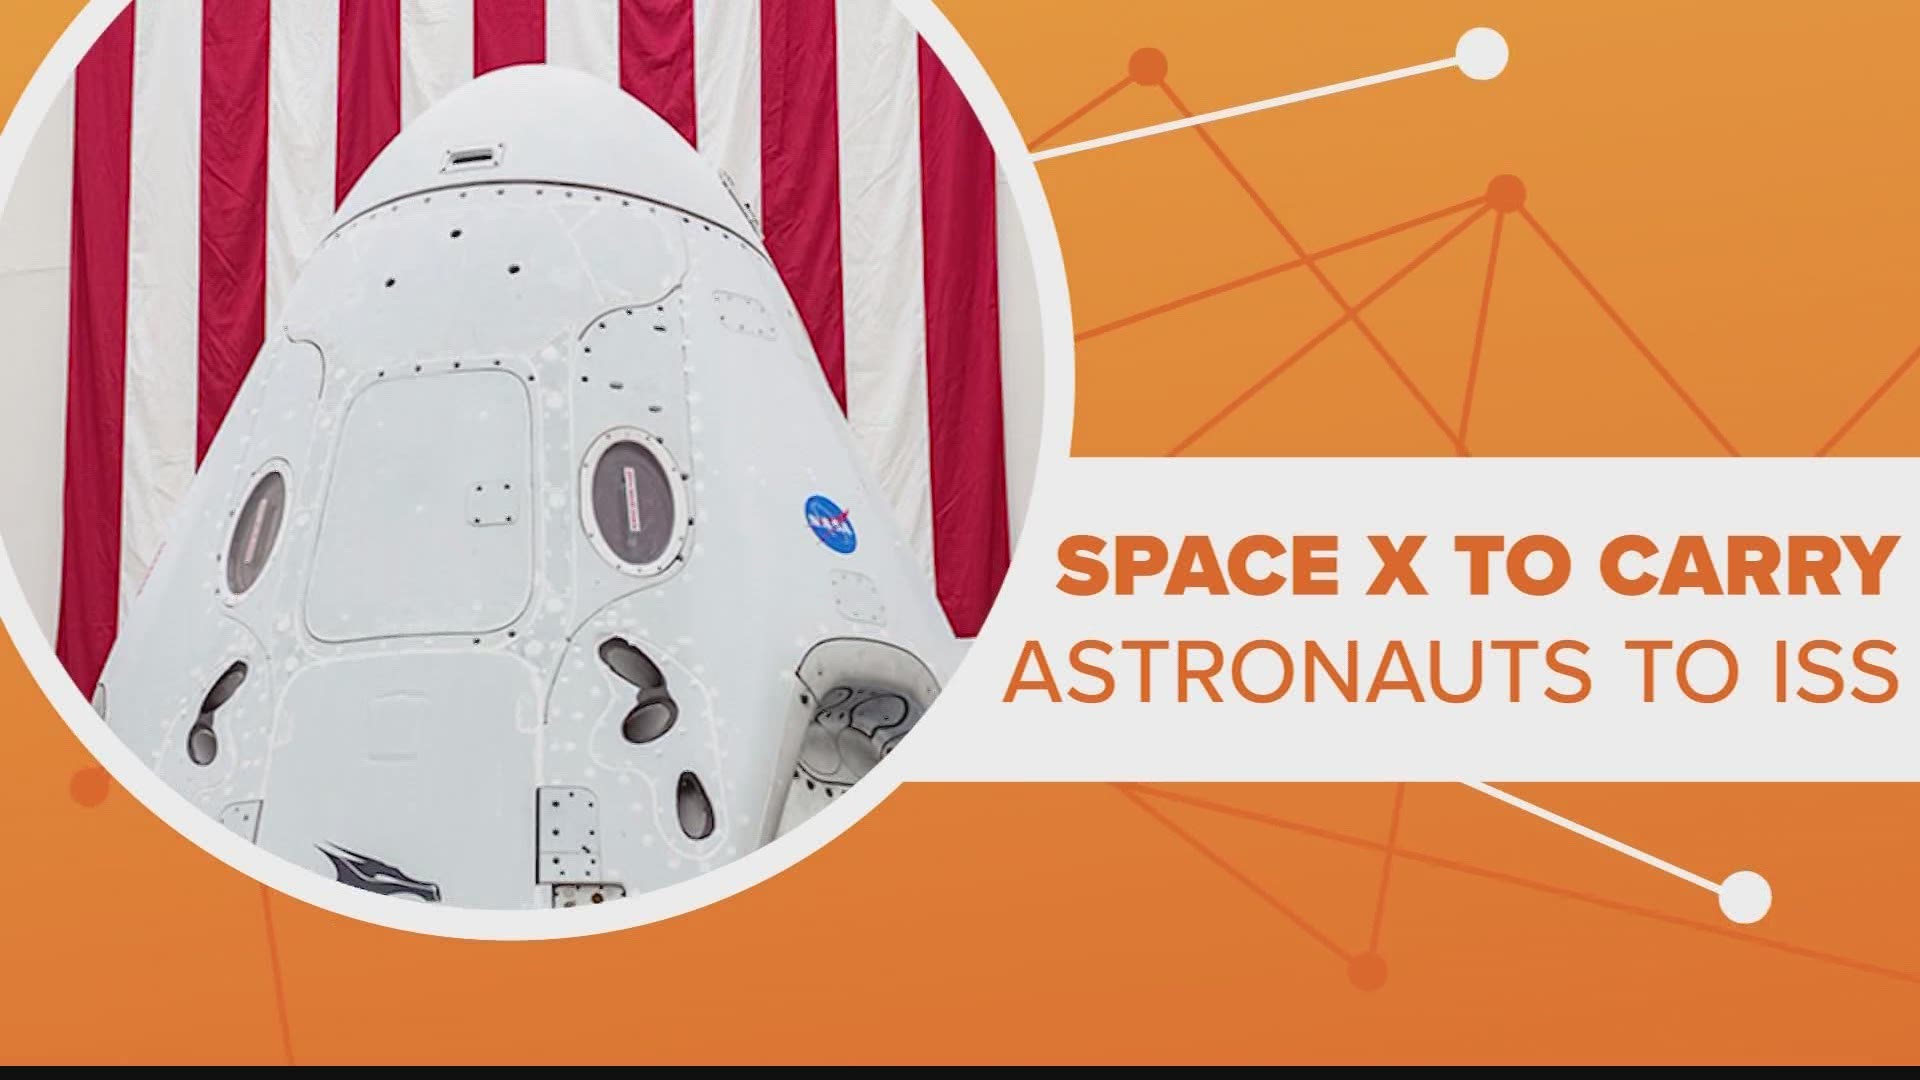 Mark your calendars for May 27th! For the first time in nearly a decade, NASA astronauts will launch into space from the Kennedy Space Center.